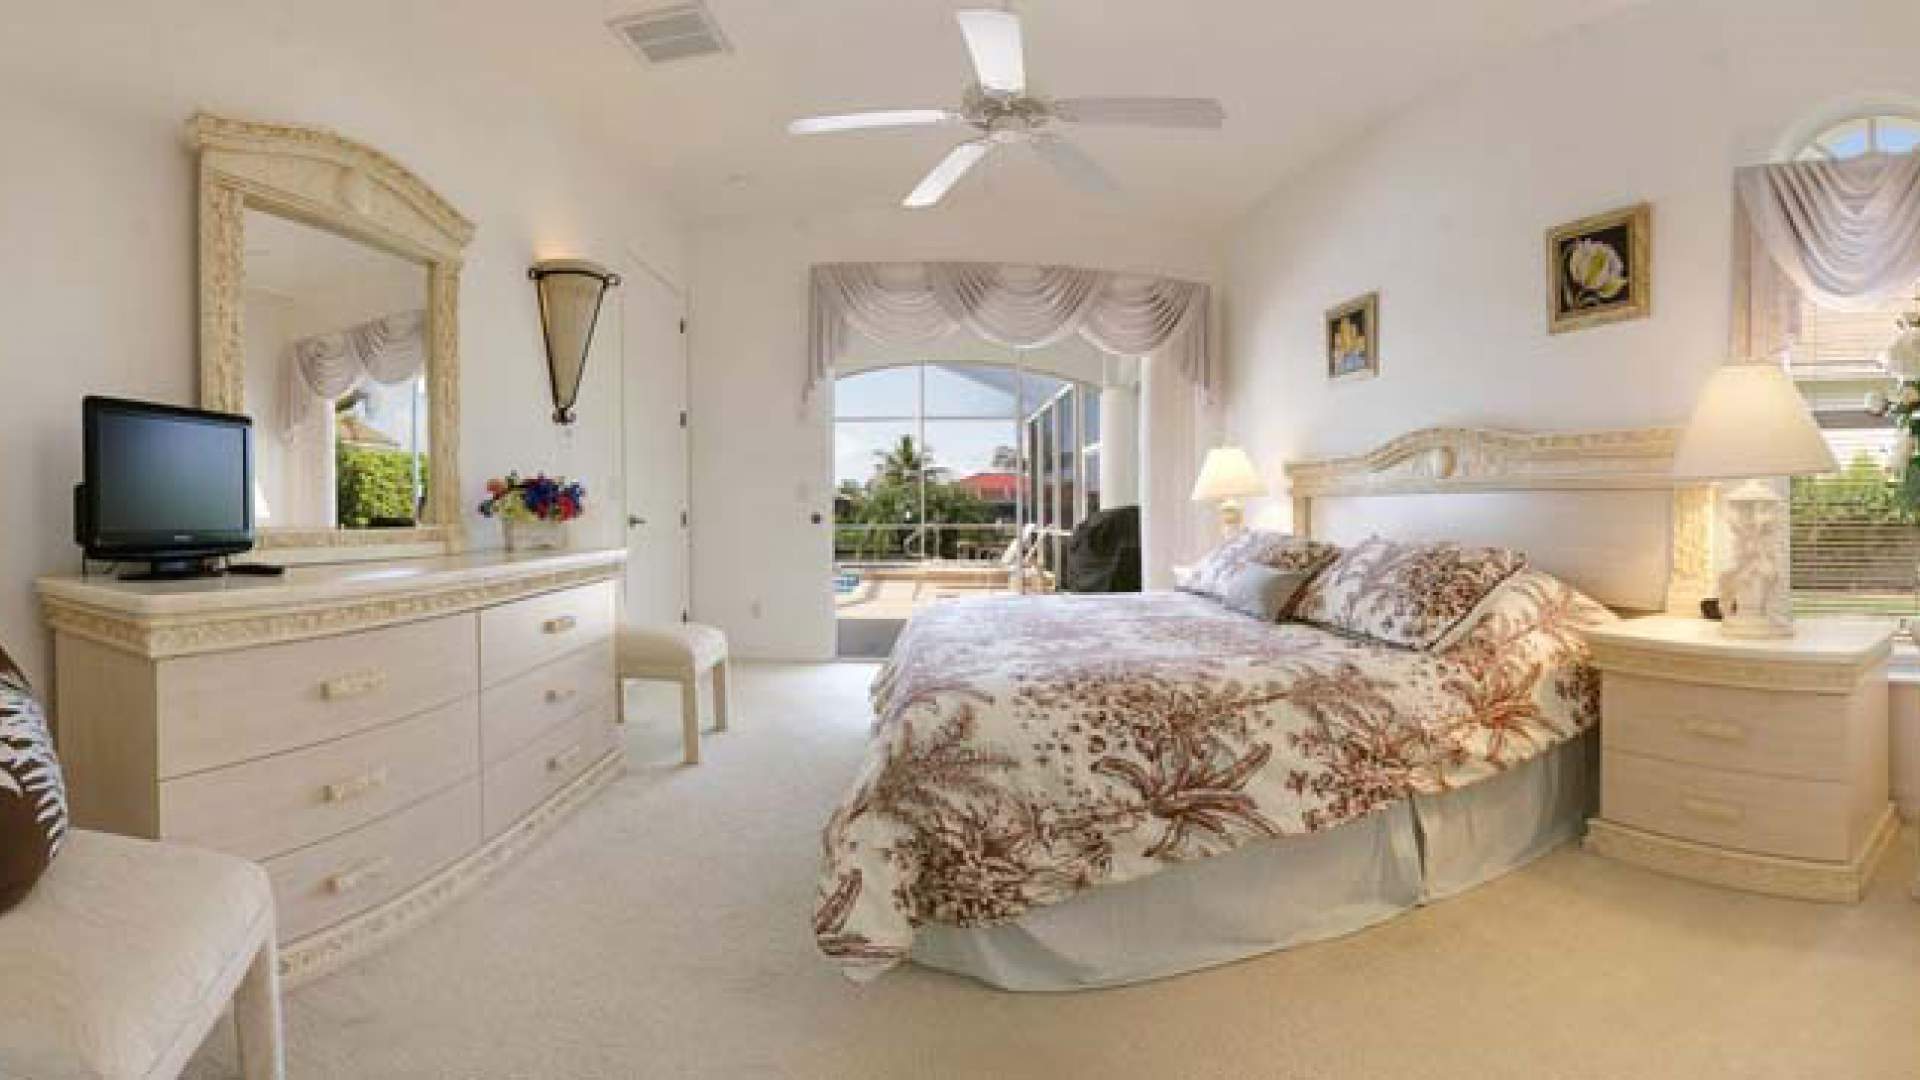 The master bedroom offers elegant furnishings and a King size bed